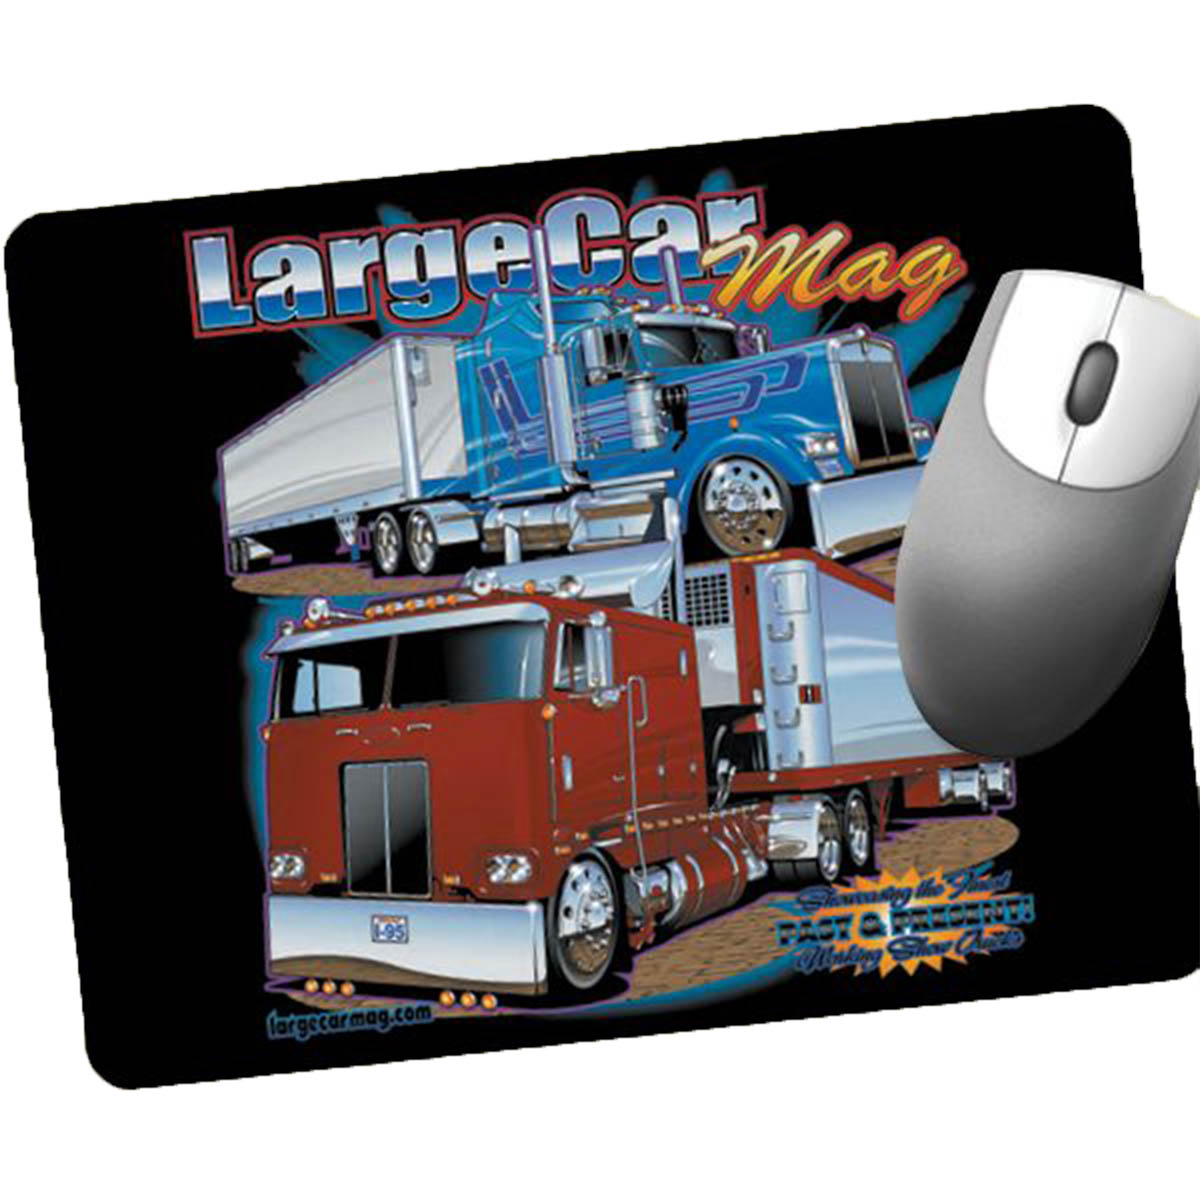 Antimicrobial Fabric Surface Mouse Pad (7" x 9" x 1/4")